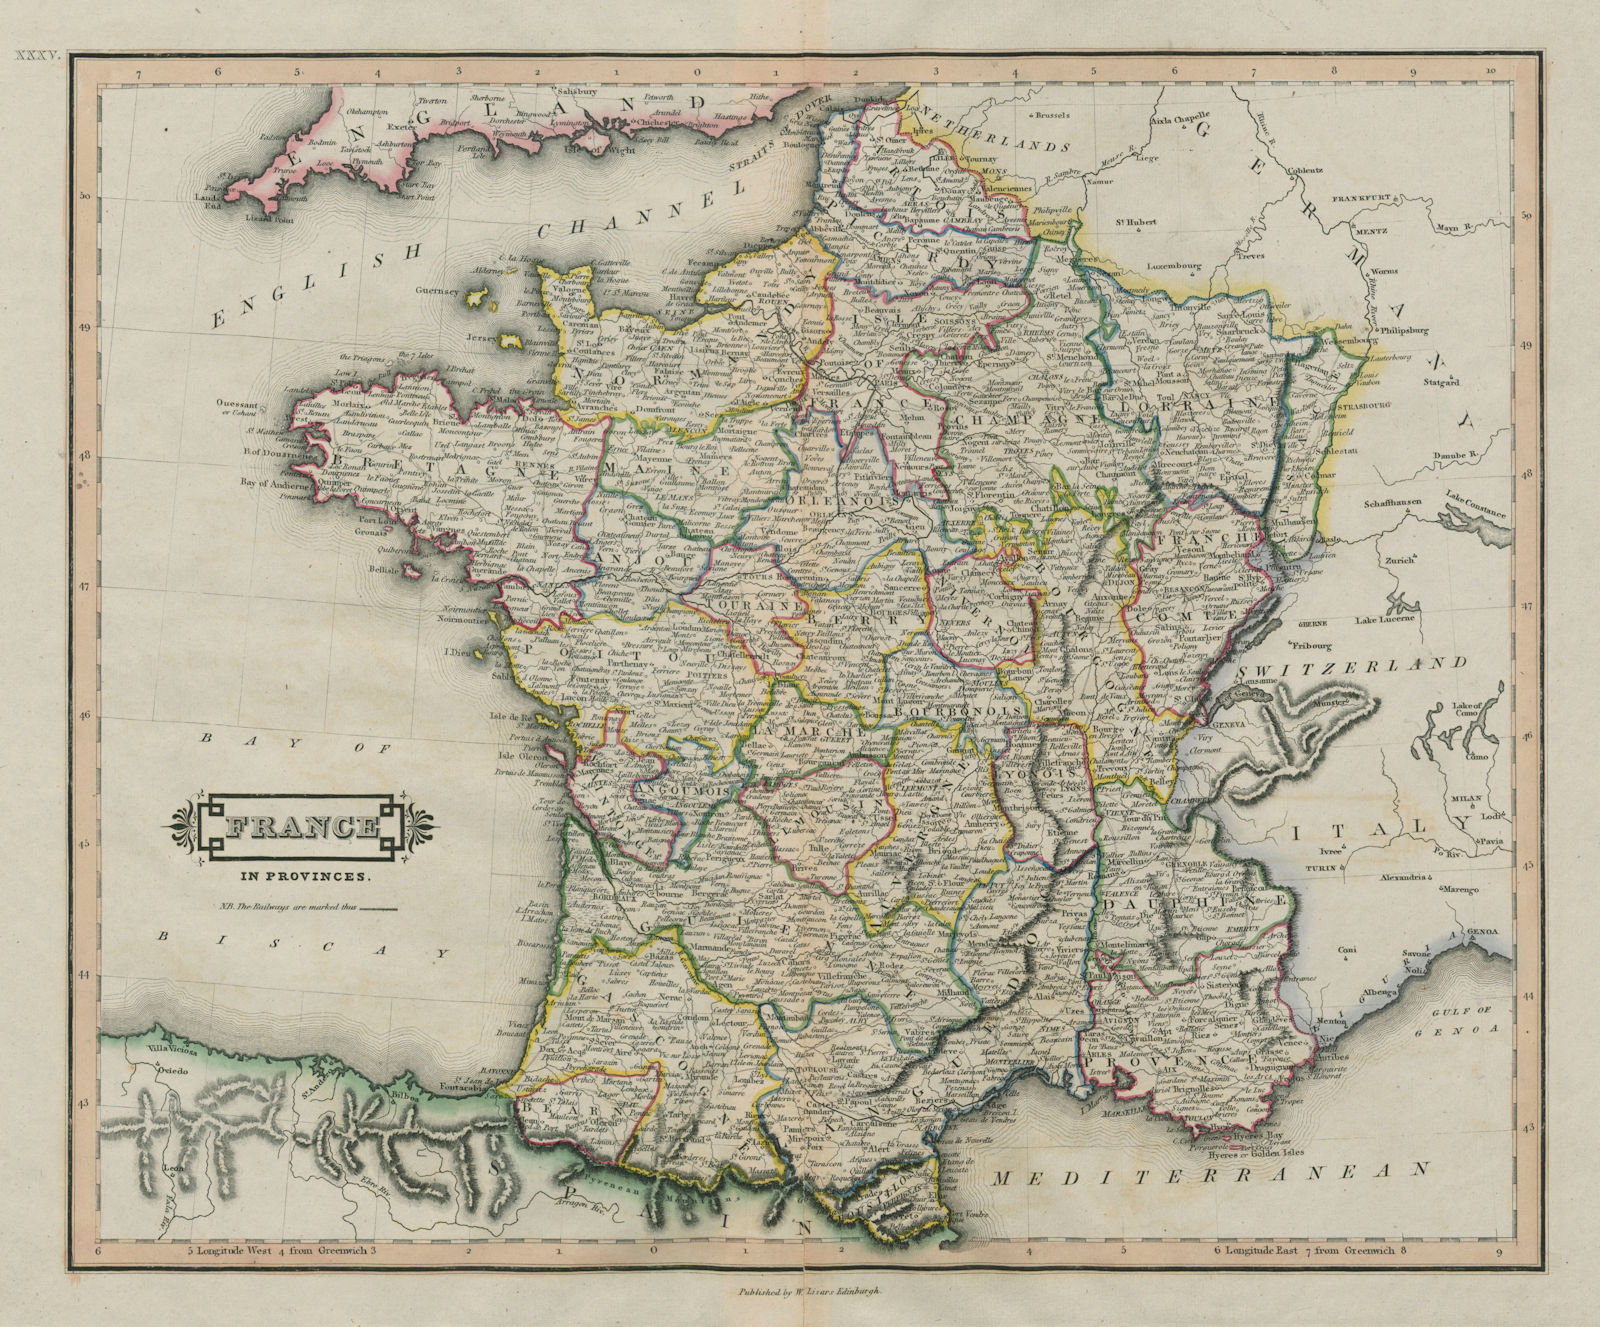 Associate Product France in provinces. Pre-Revolutionary France. LIZARS 1842 old antique map